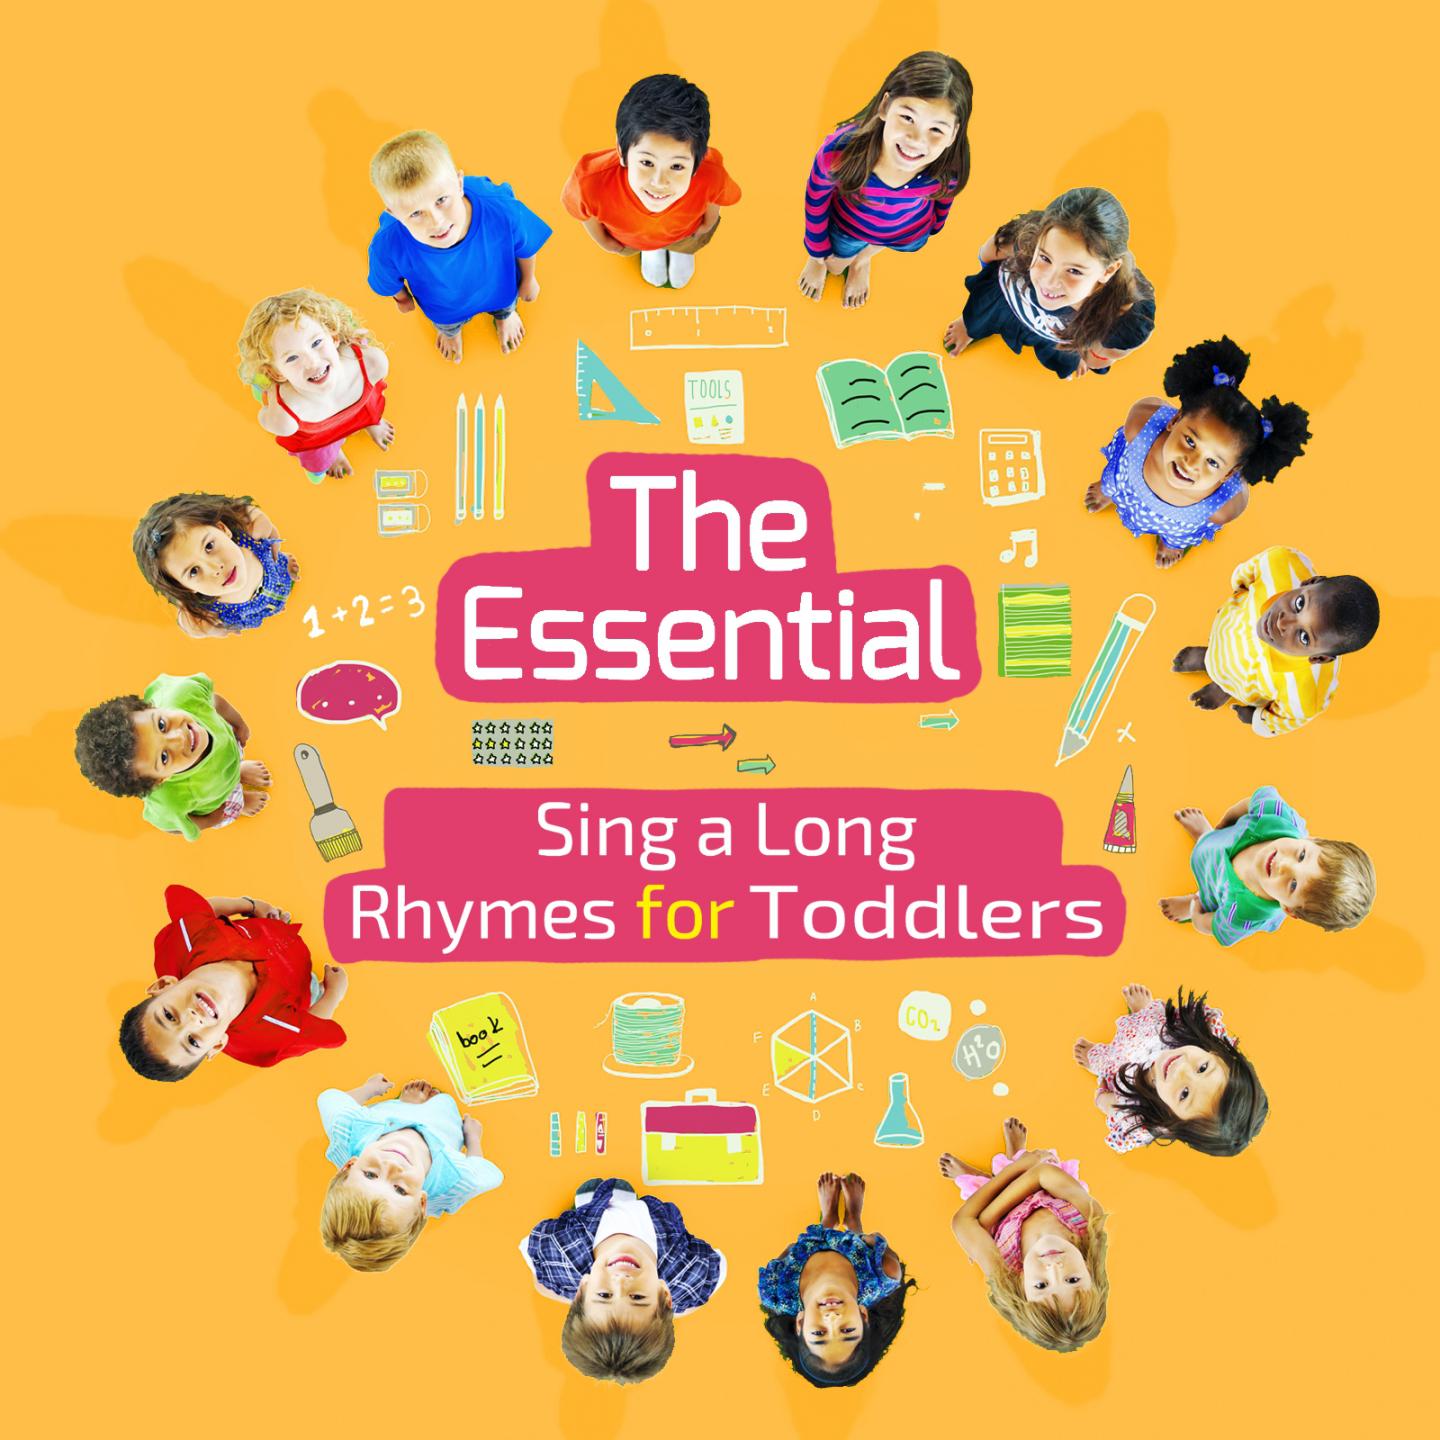 The Essential Sing a Long Rhymes for Toddlers